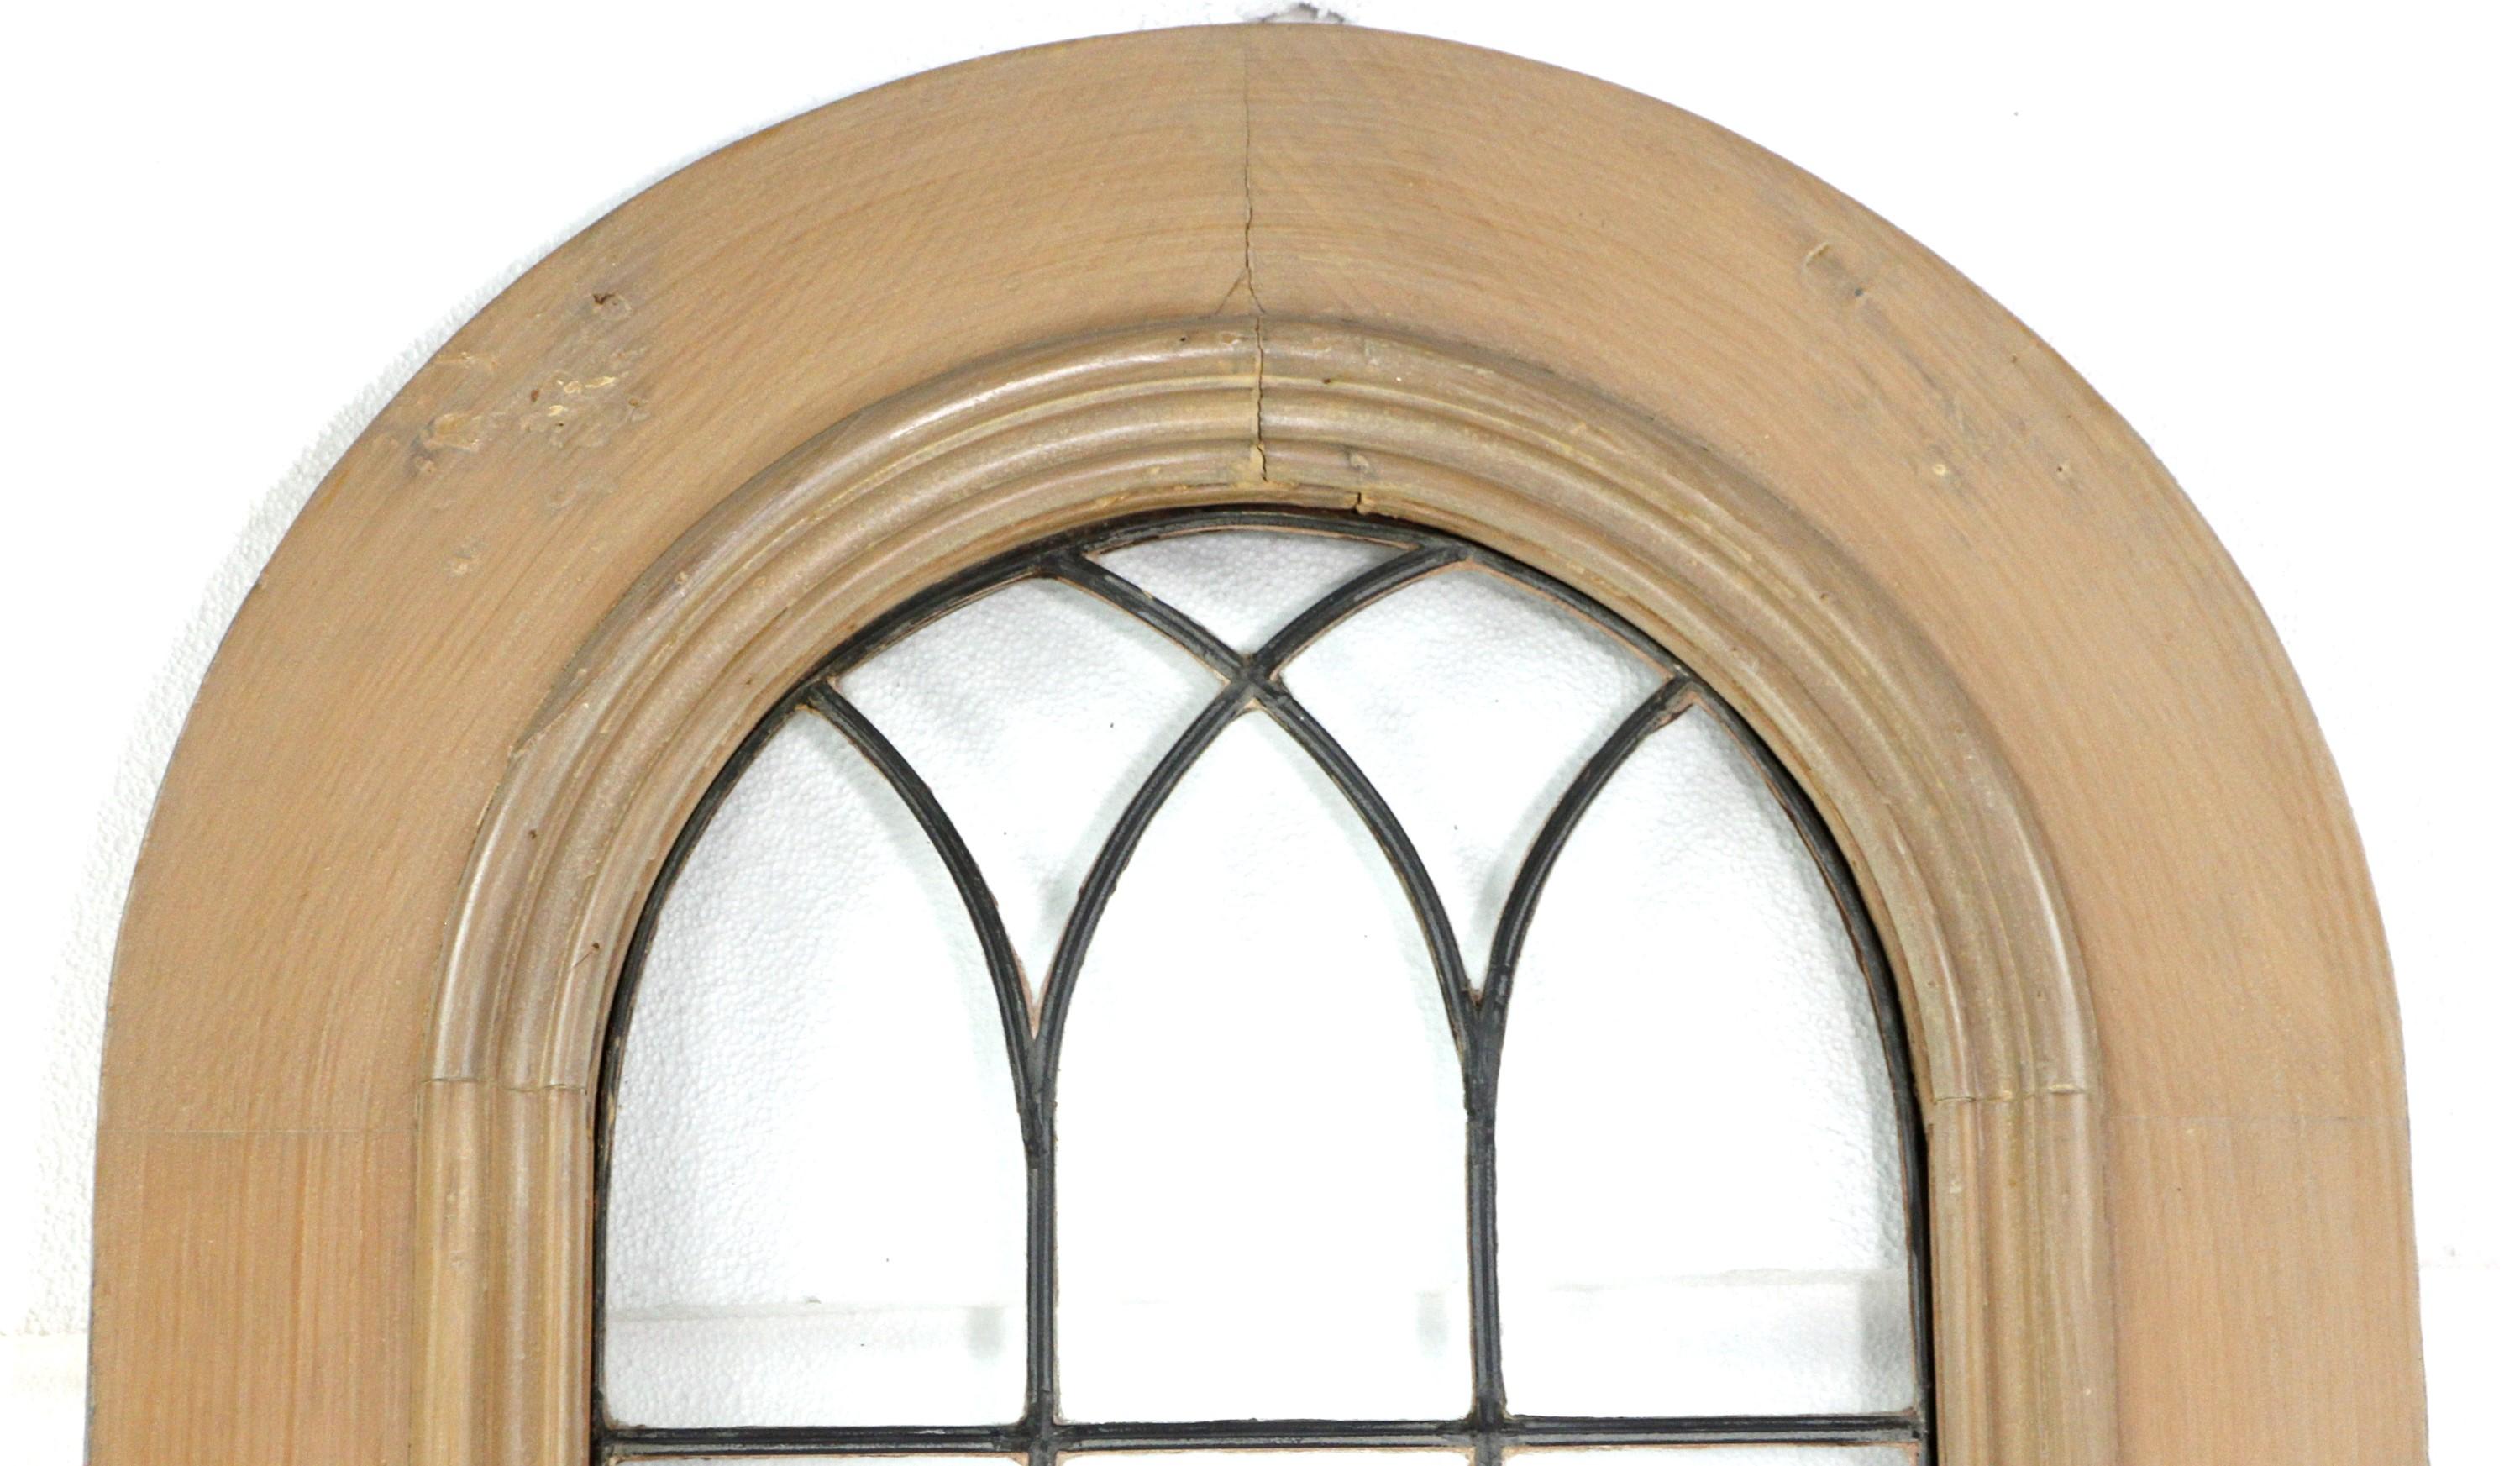 Early 20th Century American arch top door in a light tone. Total of 21 leaded glass panels with the upper ones following the arch of the door top. Typical chips and scratches as to be expected. Please see images. Please note, this item is located in